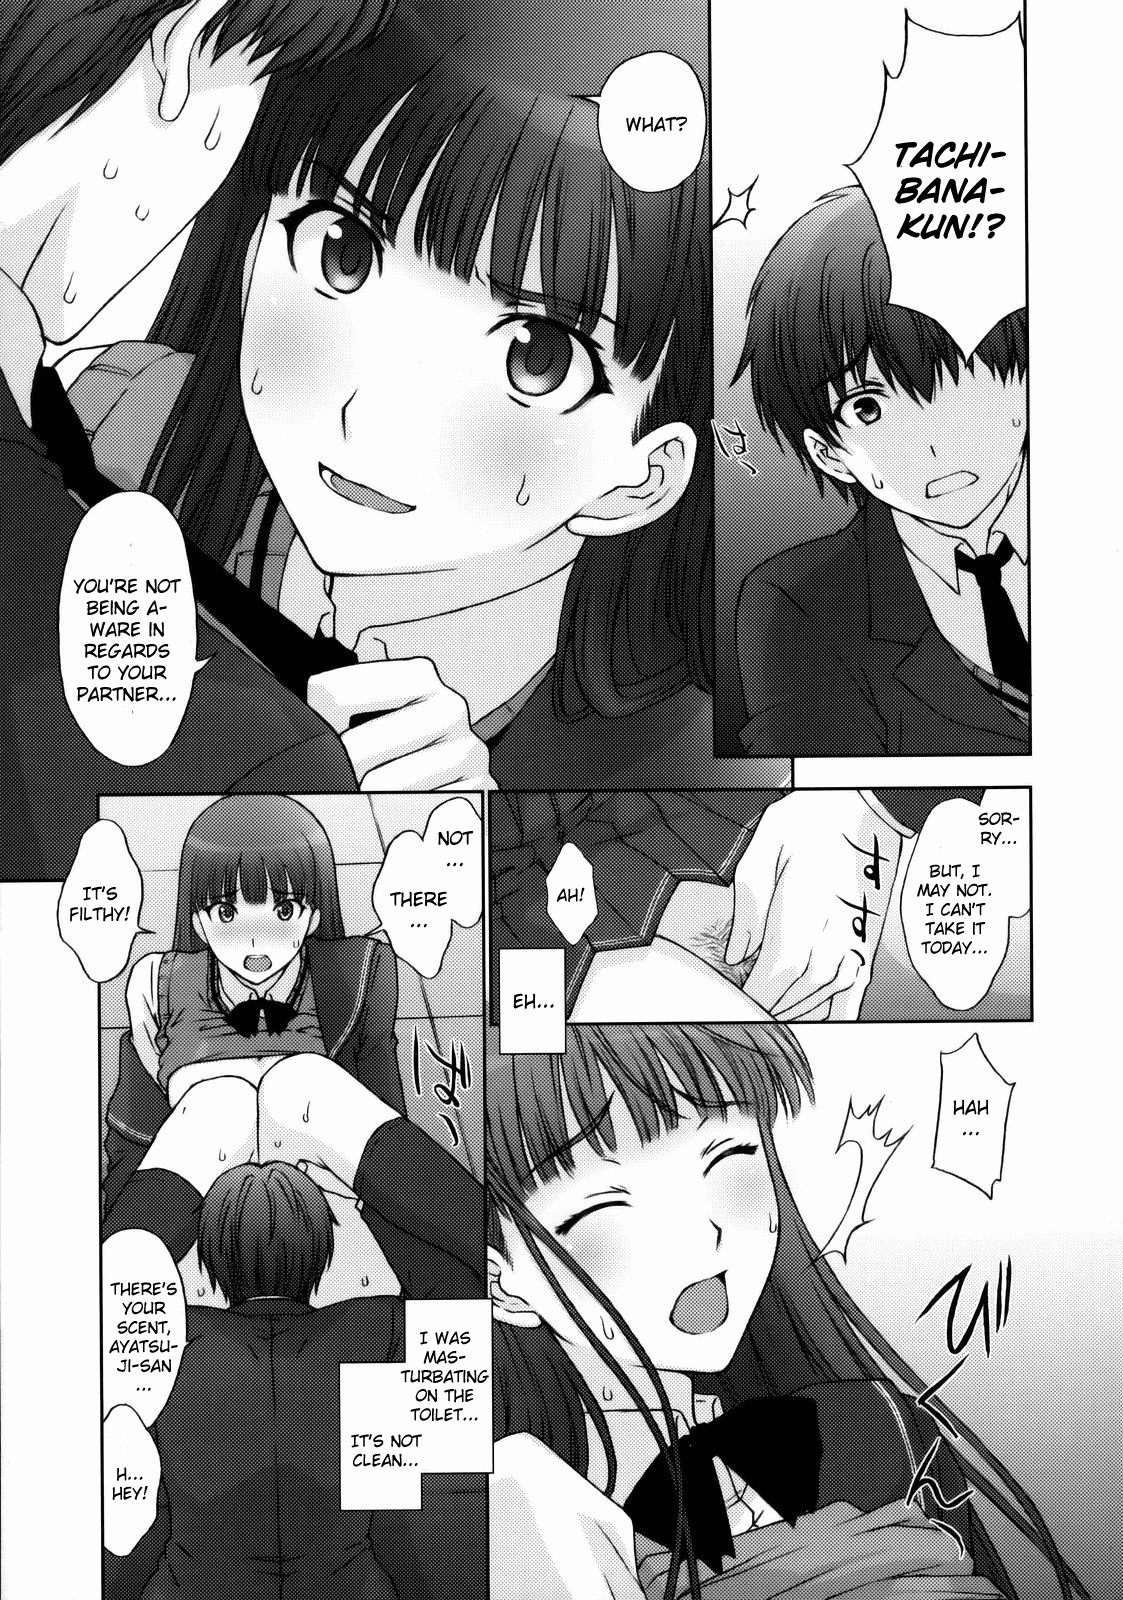 [Secret Society M] The Masked Honor Student and the Perverted Gentleman (Amagami) [English] 